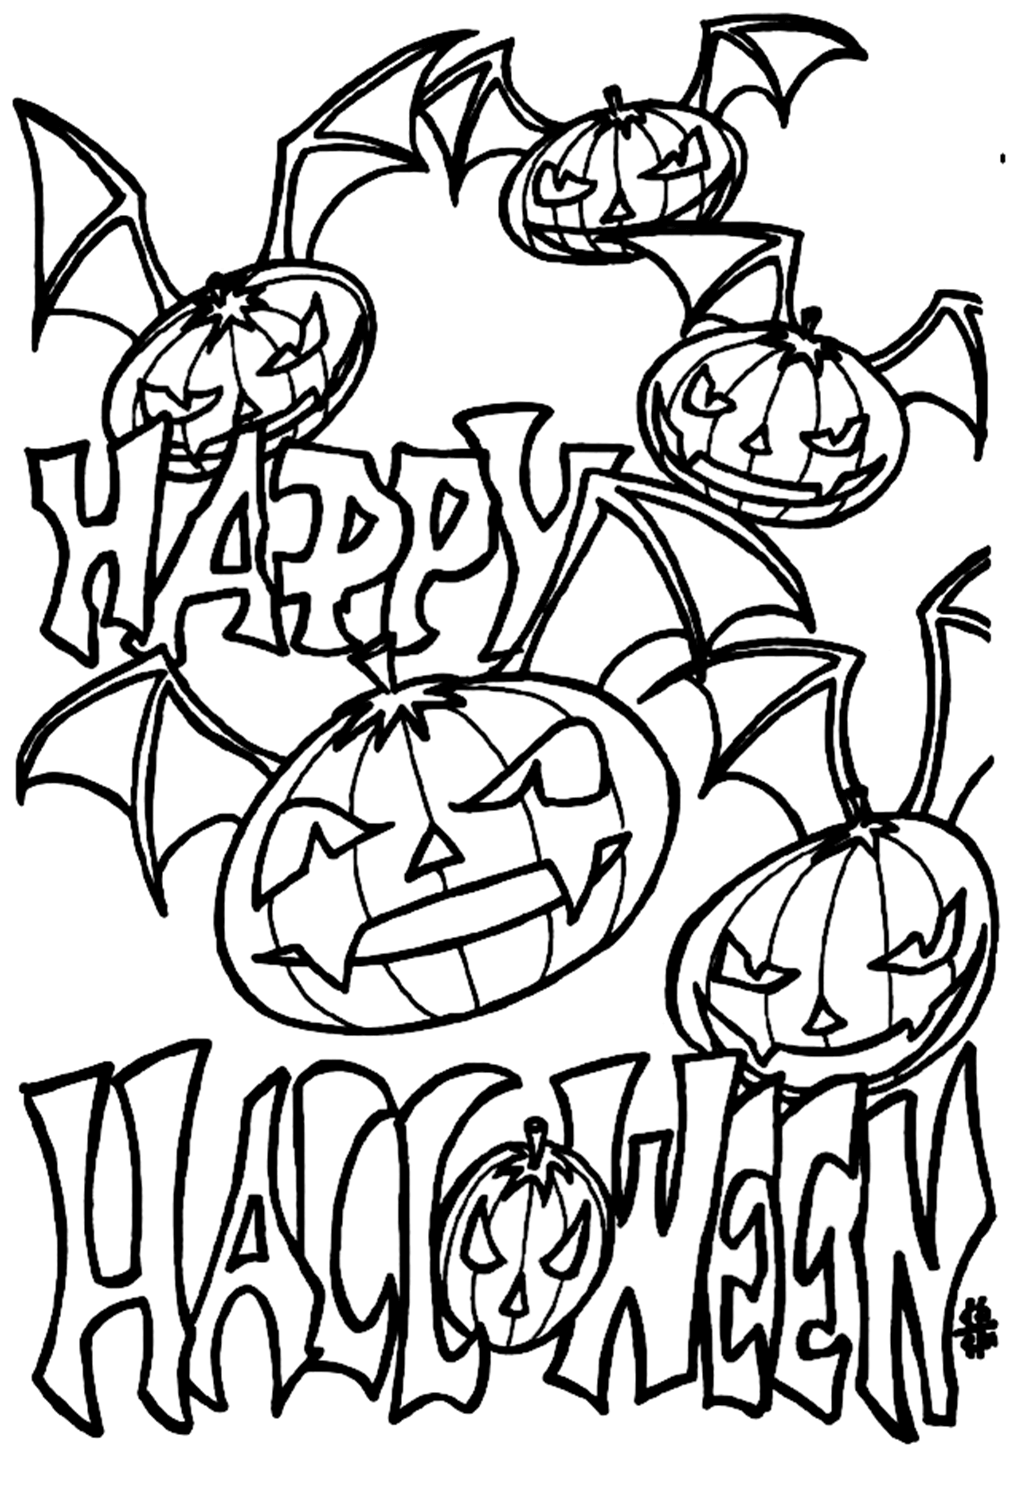 Happy Halloween Pumpkin Coloring Page Coloring Pages